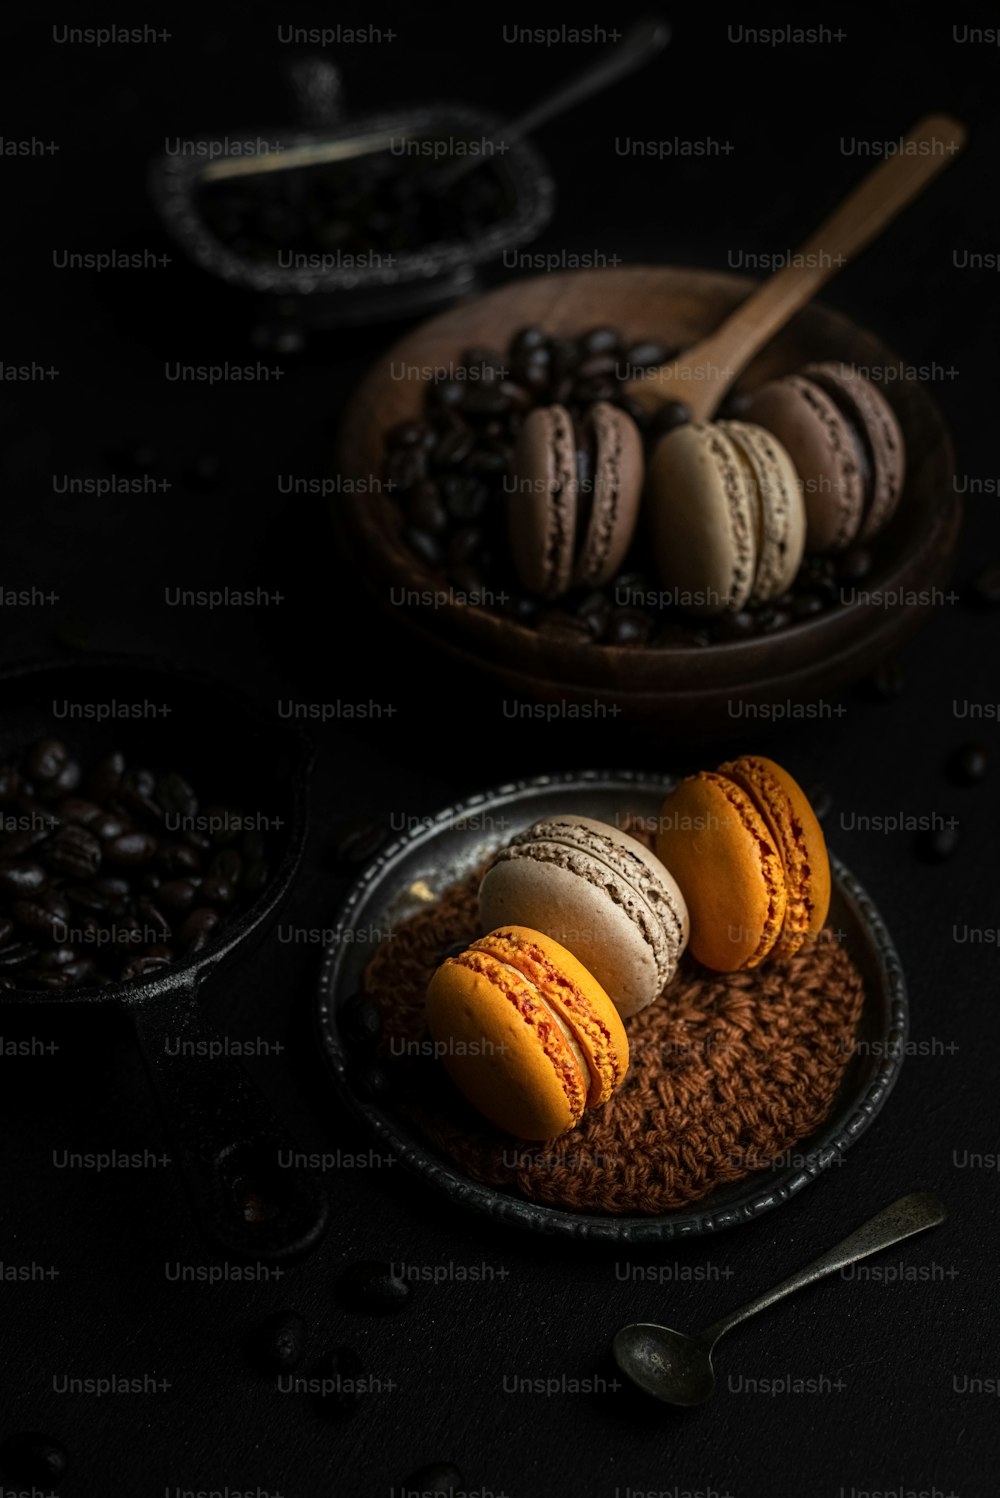 a plate of macaroons and coffee beans on a table